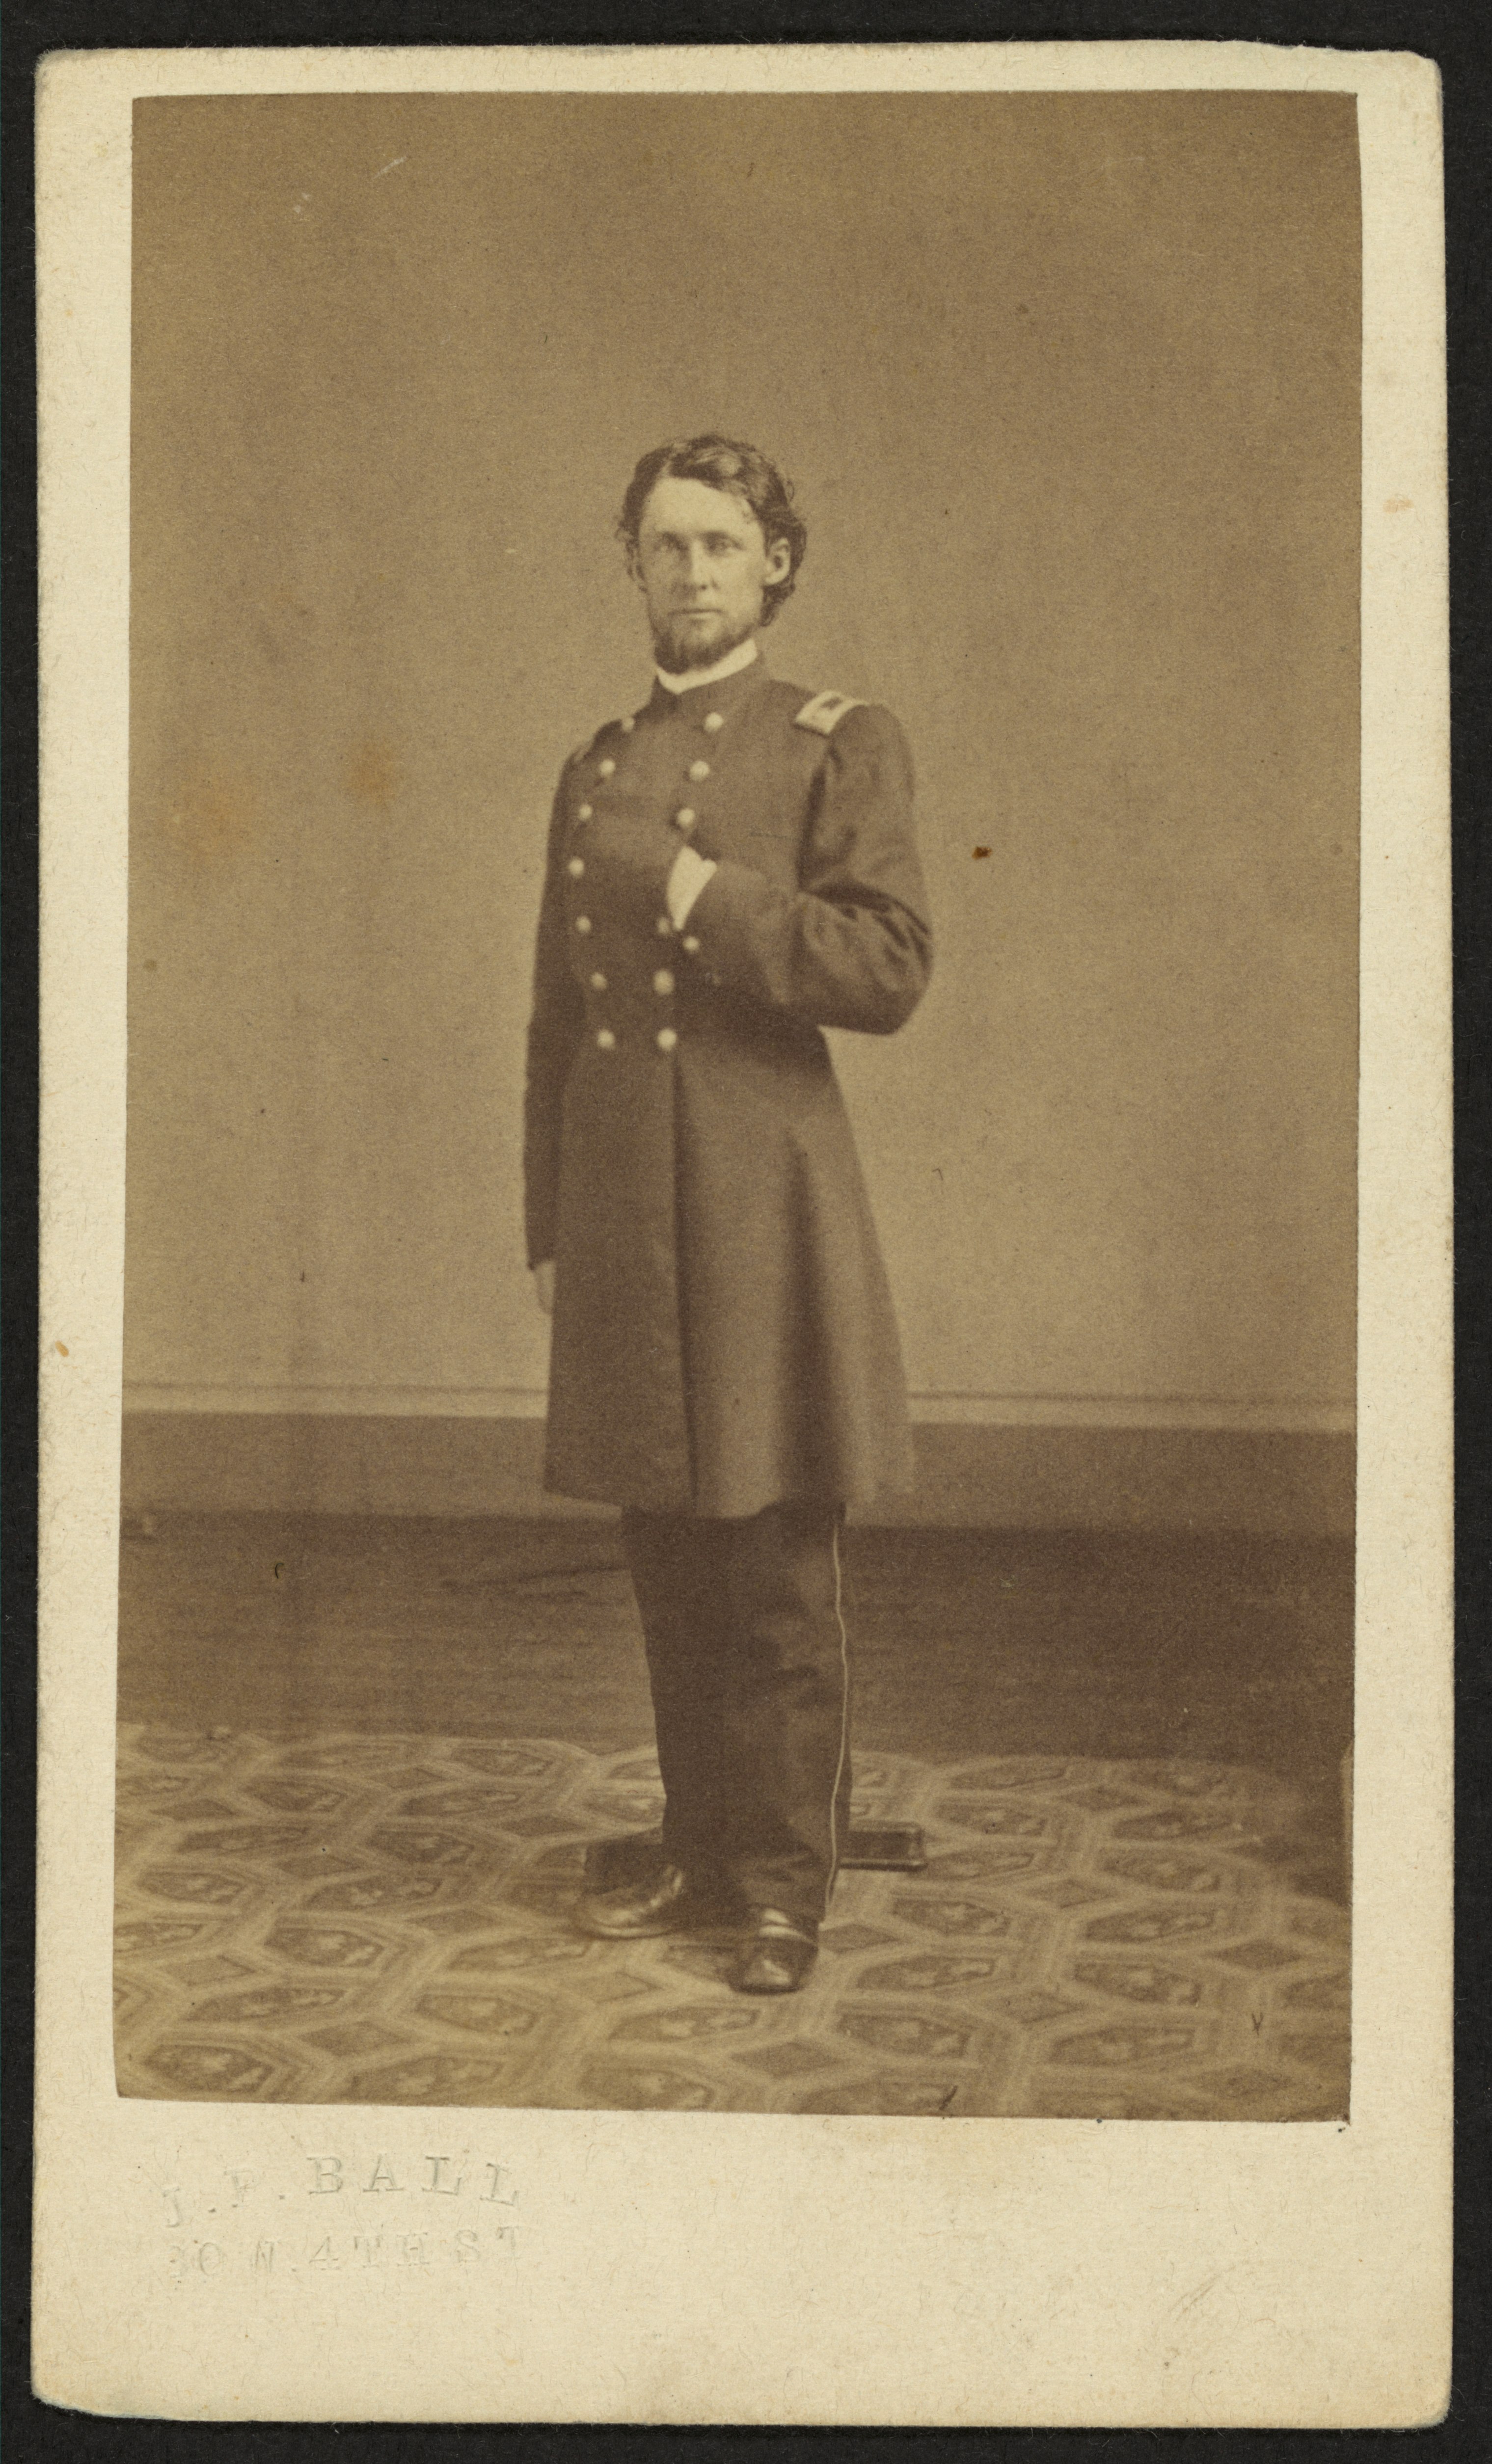 CdV  of unidentified US Civil War Solider taken somewhere between 1961-65 by Ball, James Presley, (1825-1904), photographer [Public domain]